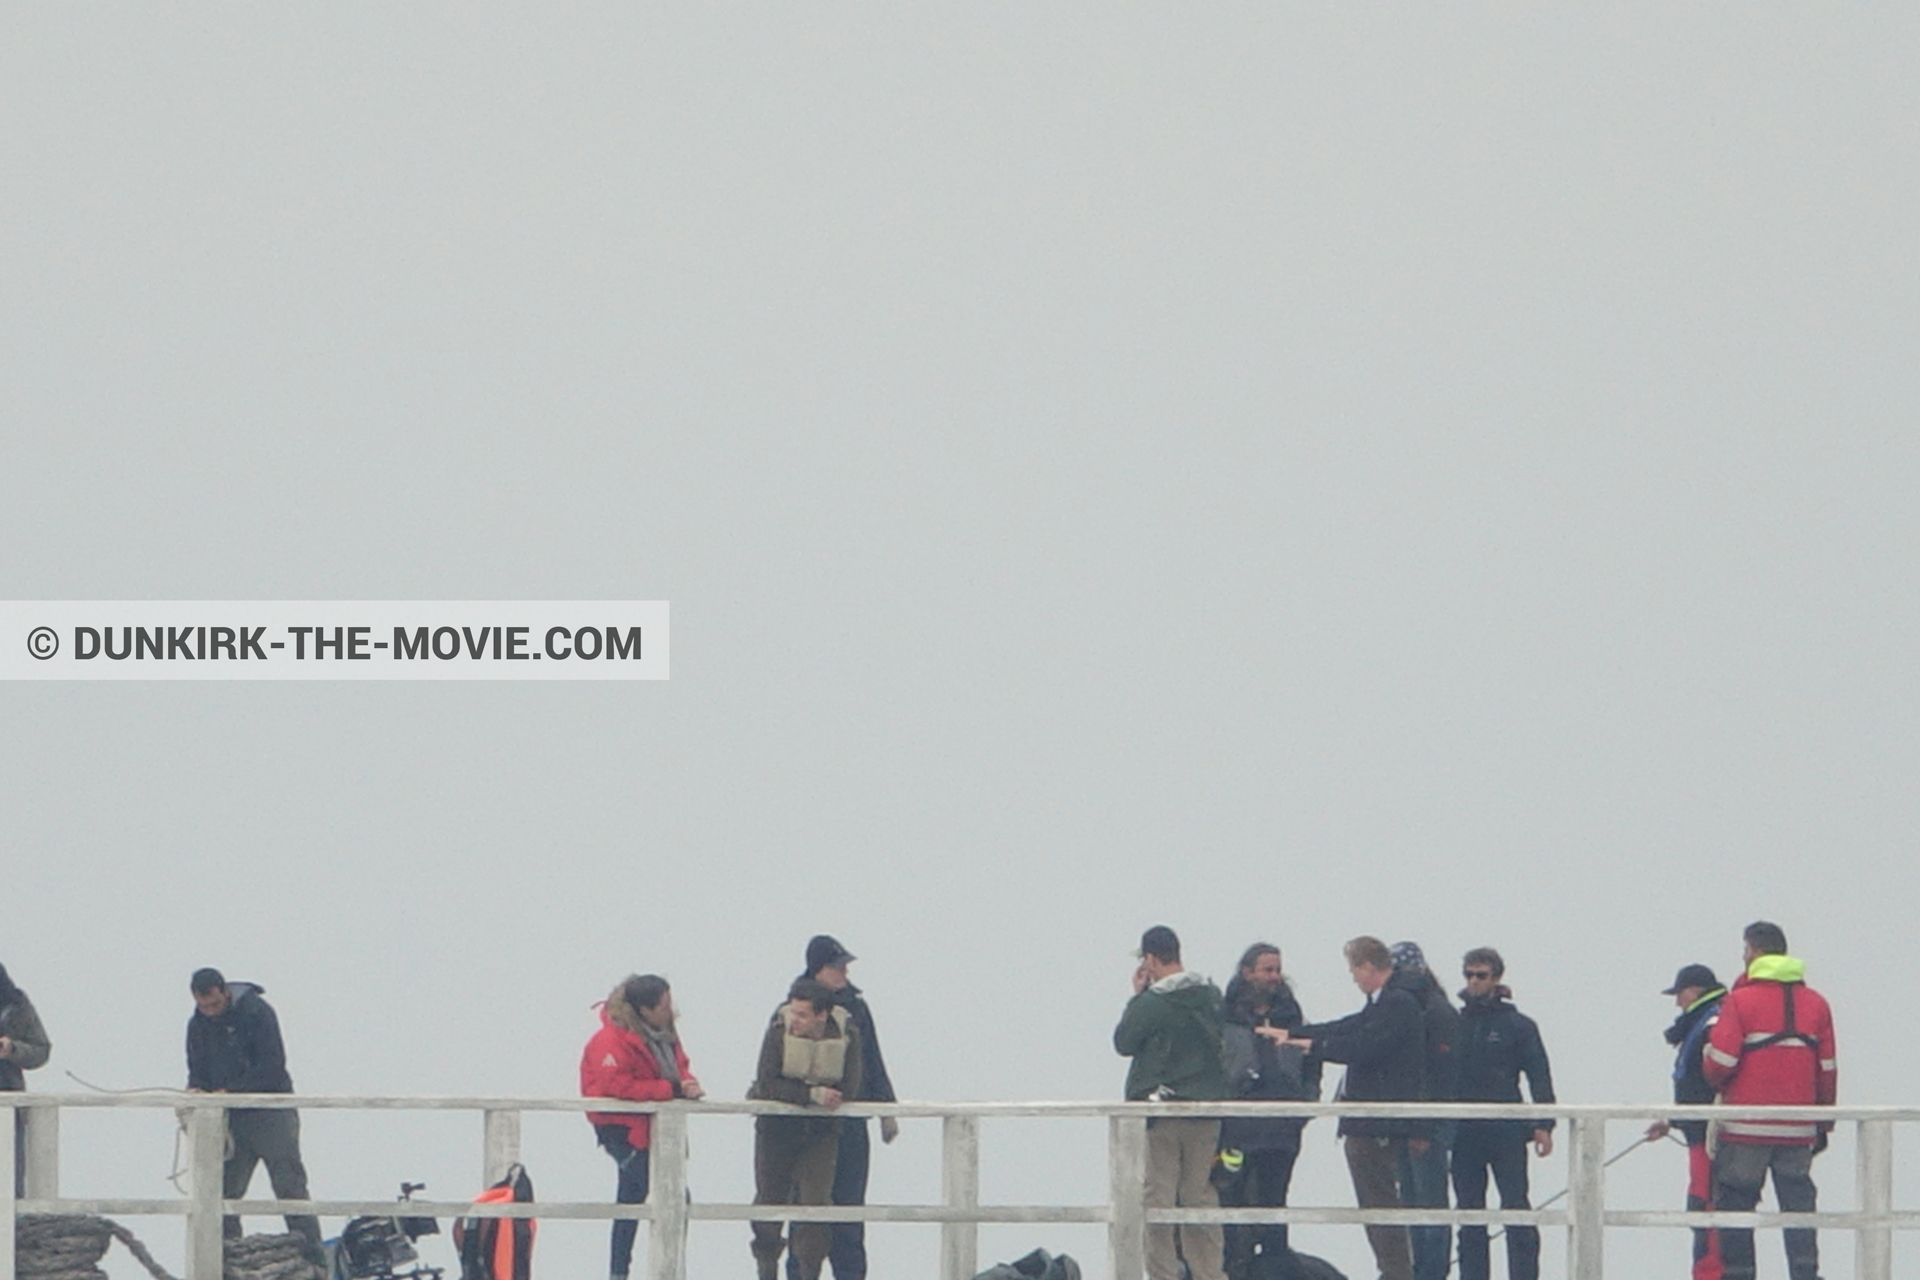 Picture with actor, grey sky, Hoyte van Hoytema, EST pier, Christopher Nolan, technical team,  from behind the scene of the Dunkirk movie by Nolan